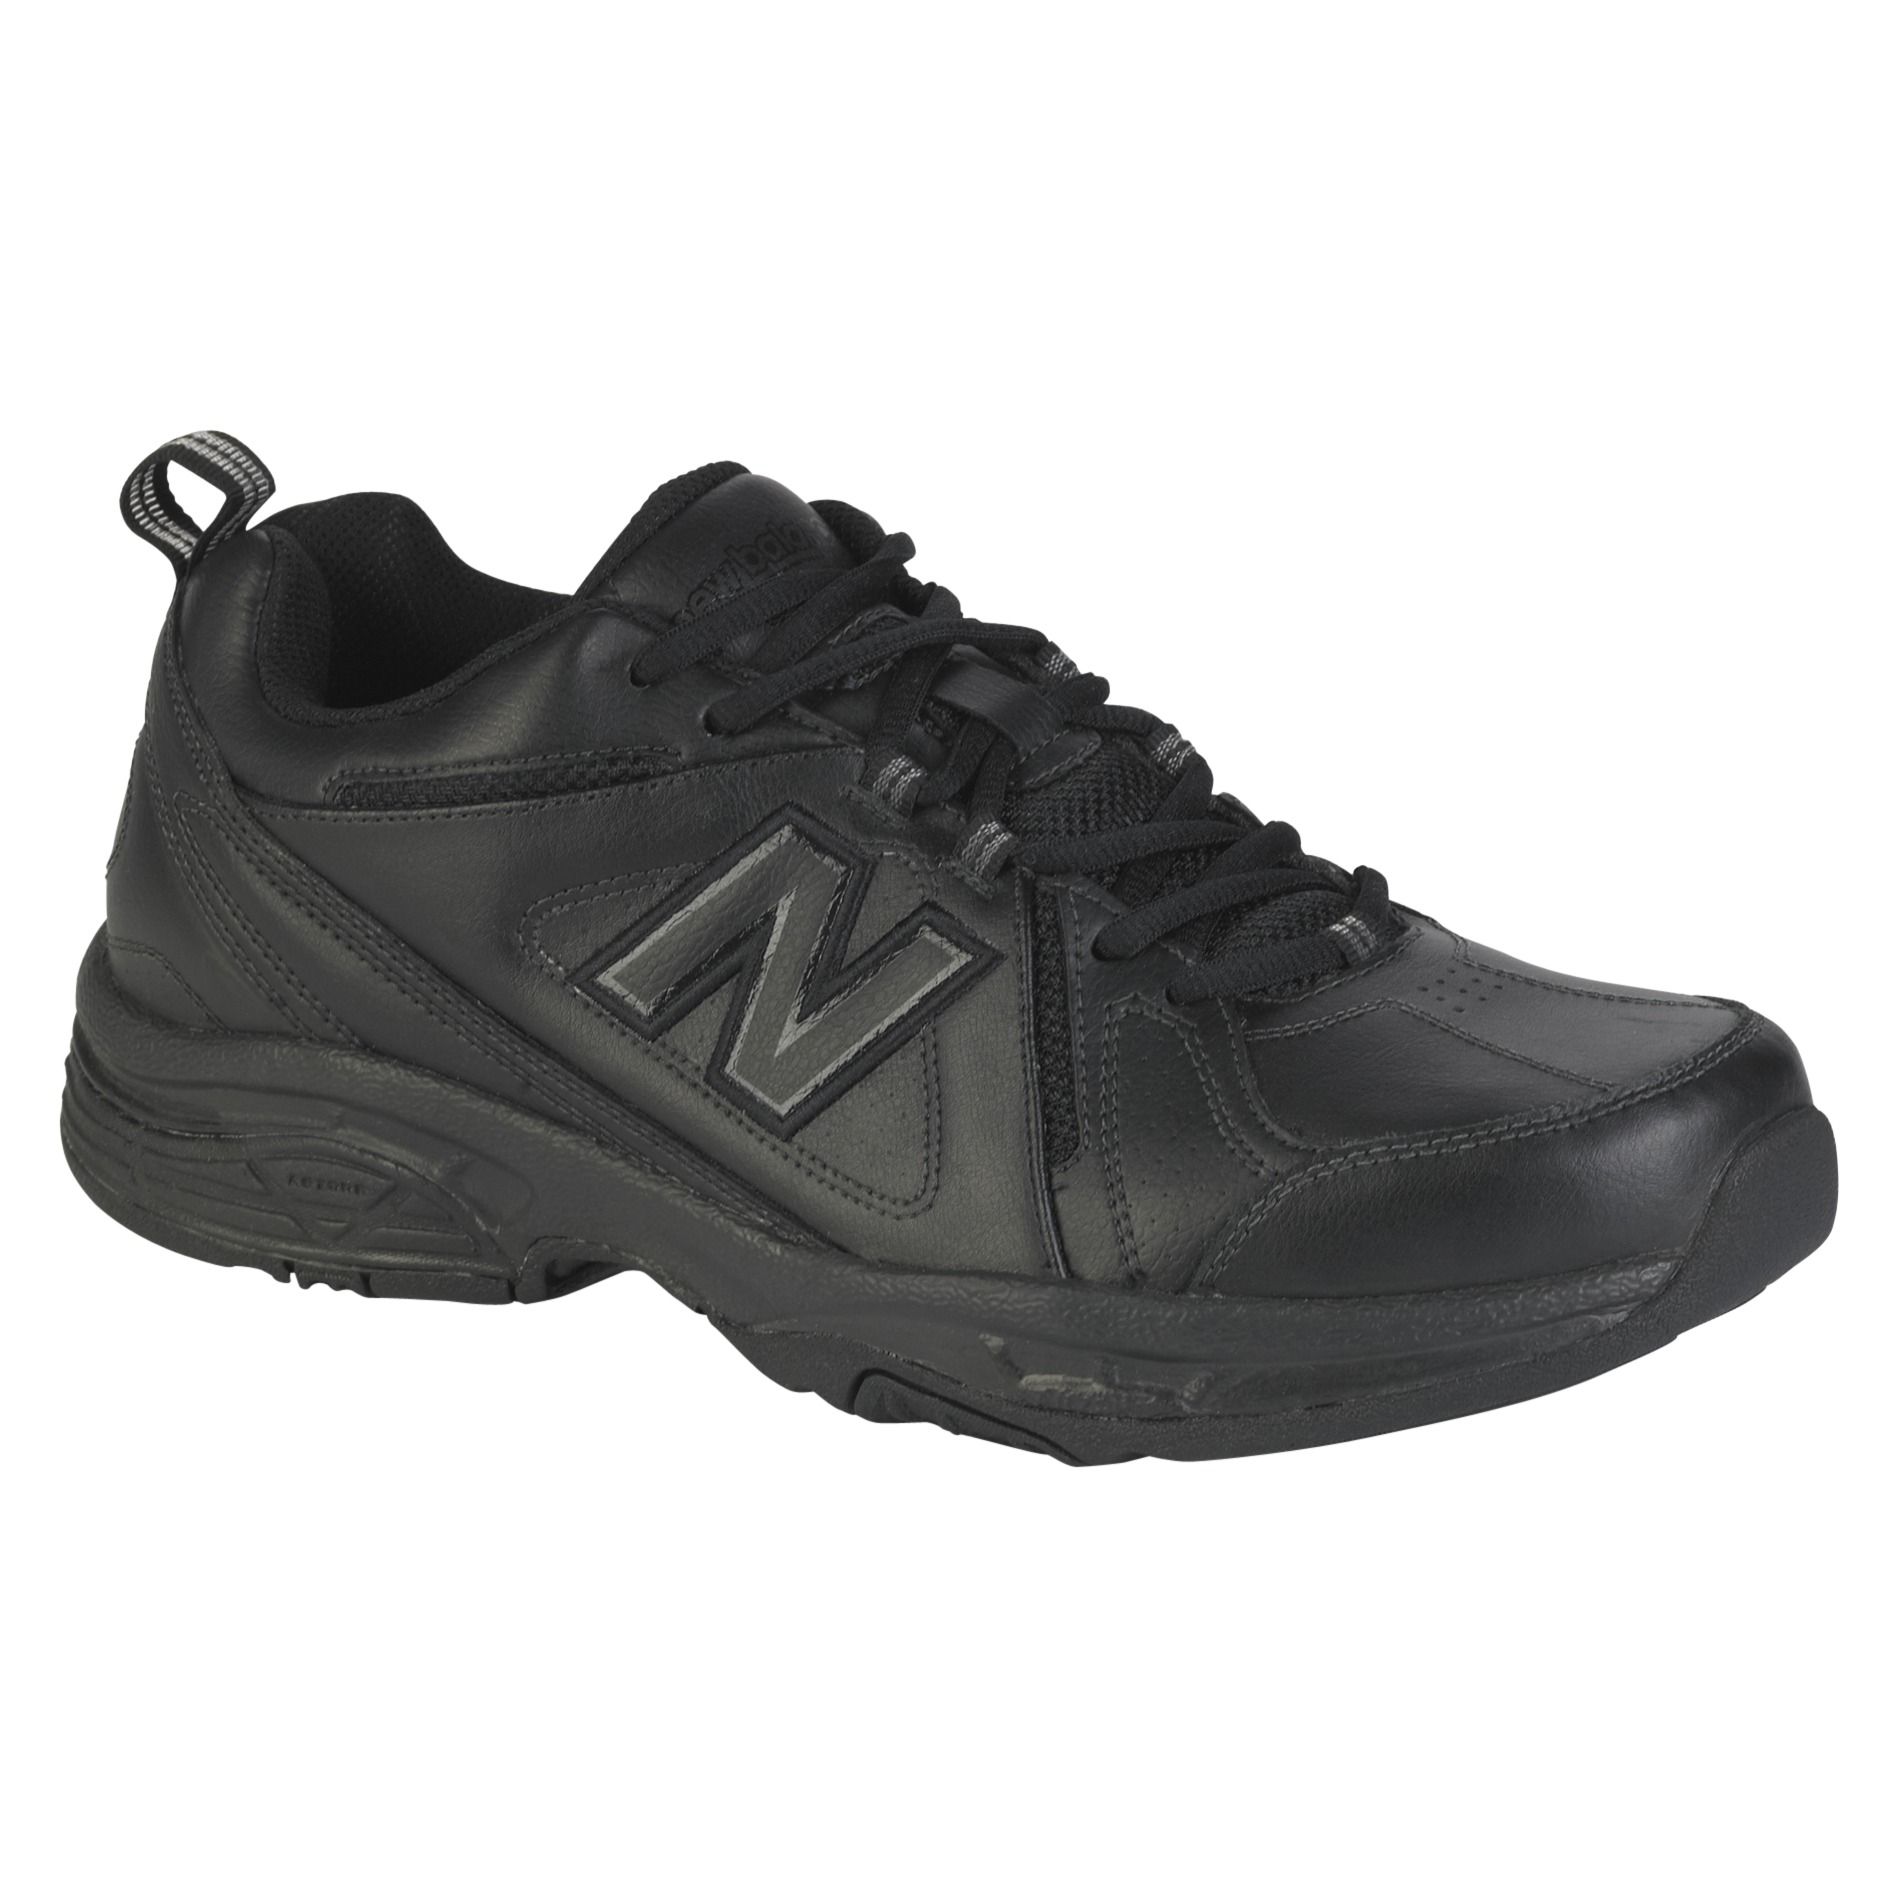 New Balance Men's 608V3 Cross Training Athletic Shoe - Wide Available ...